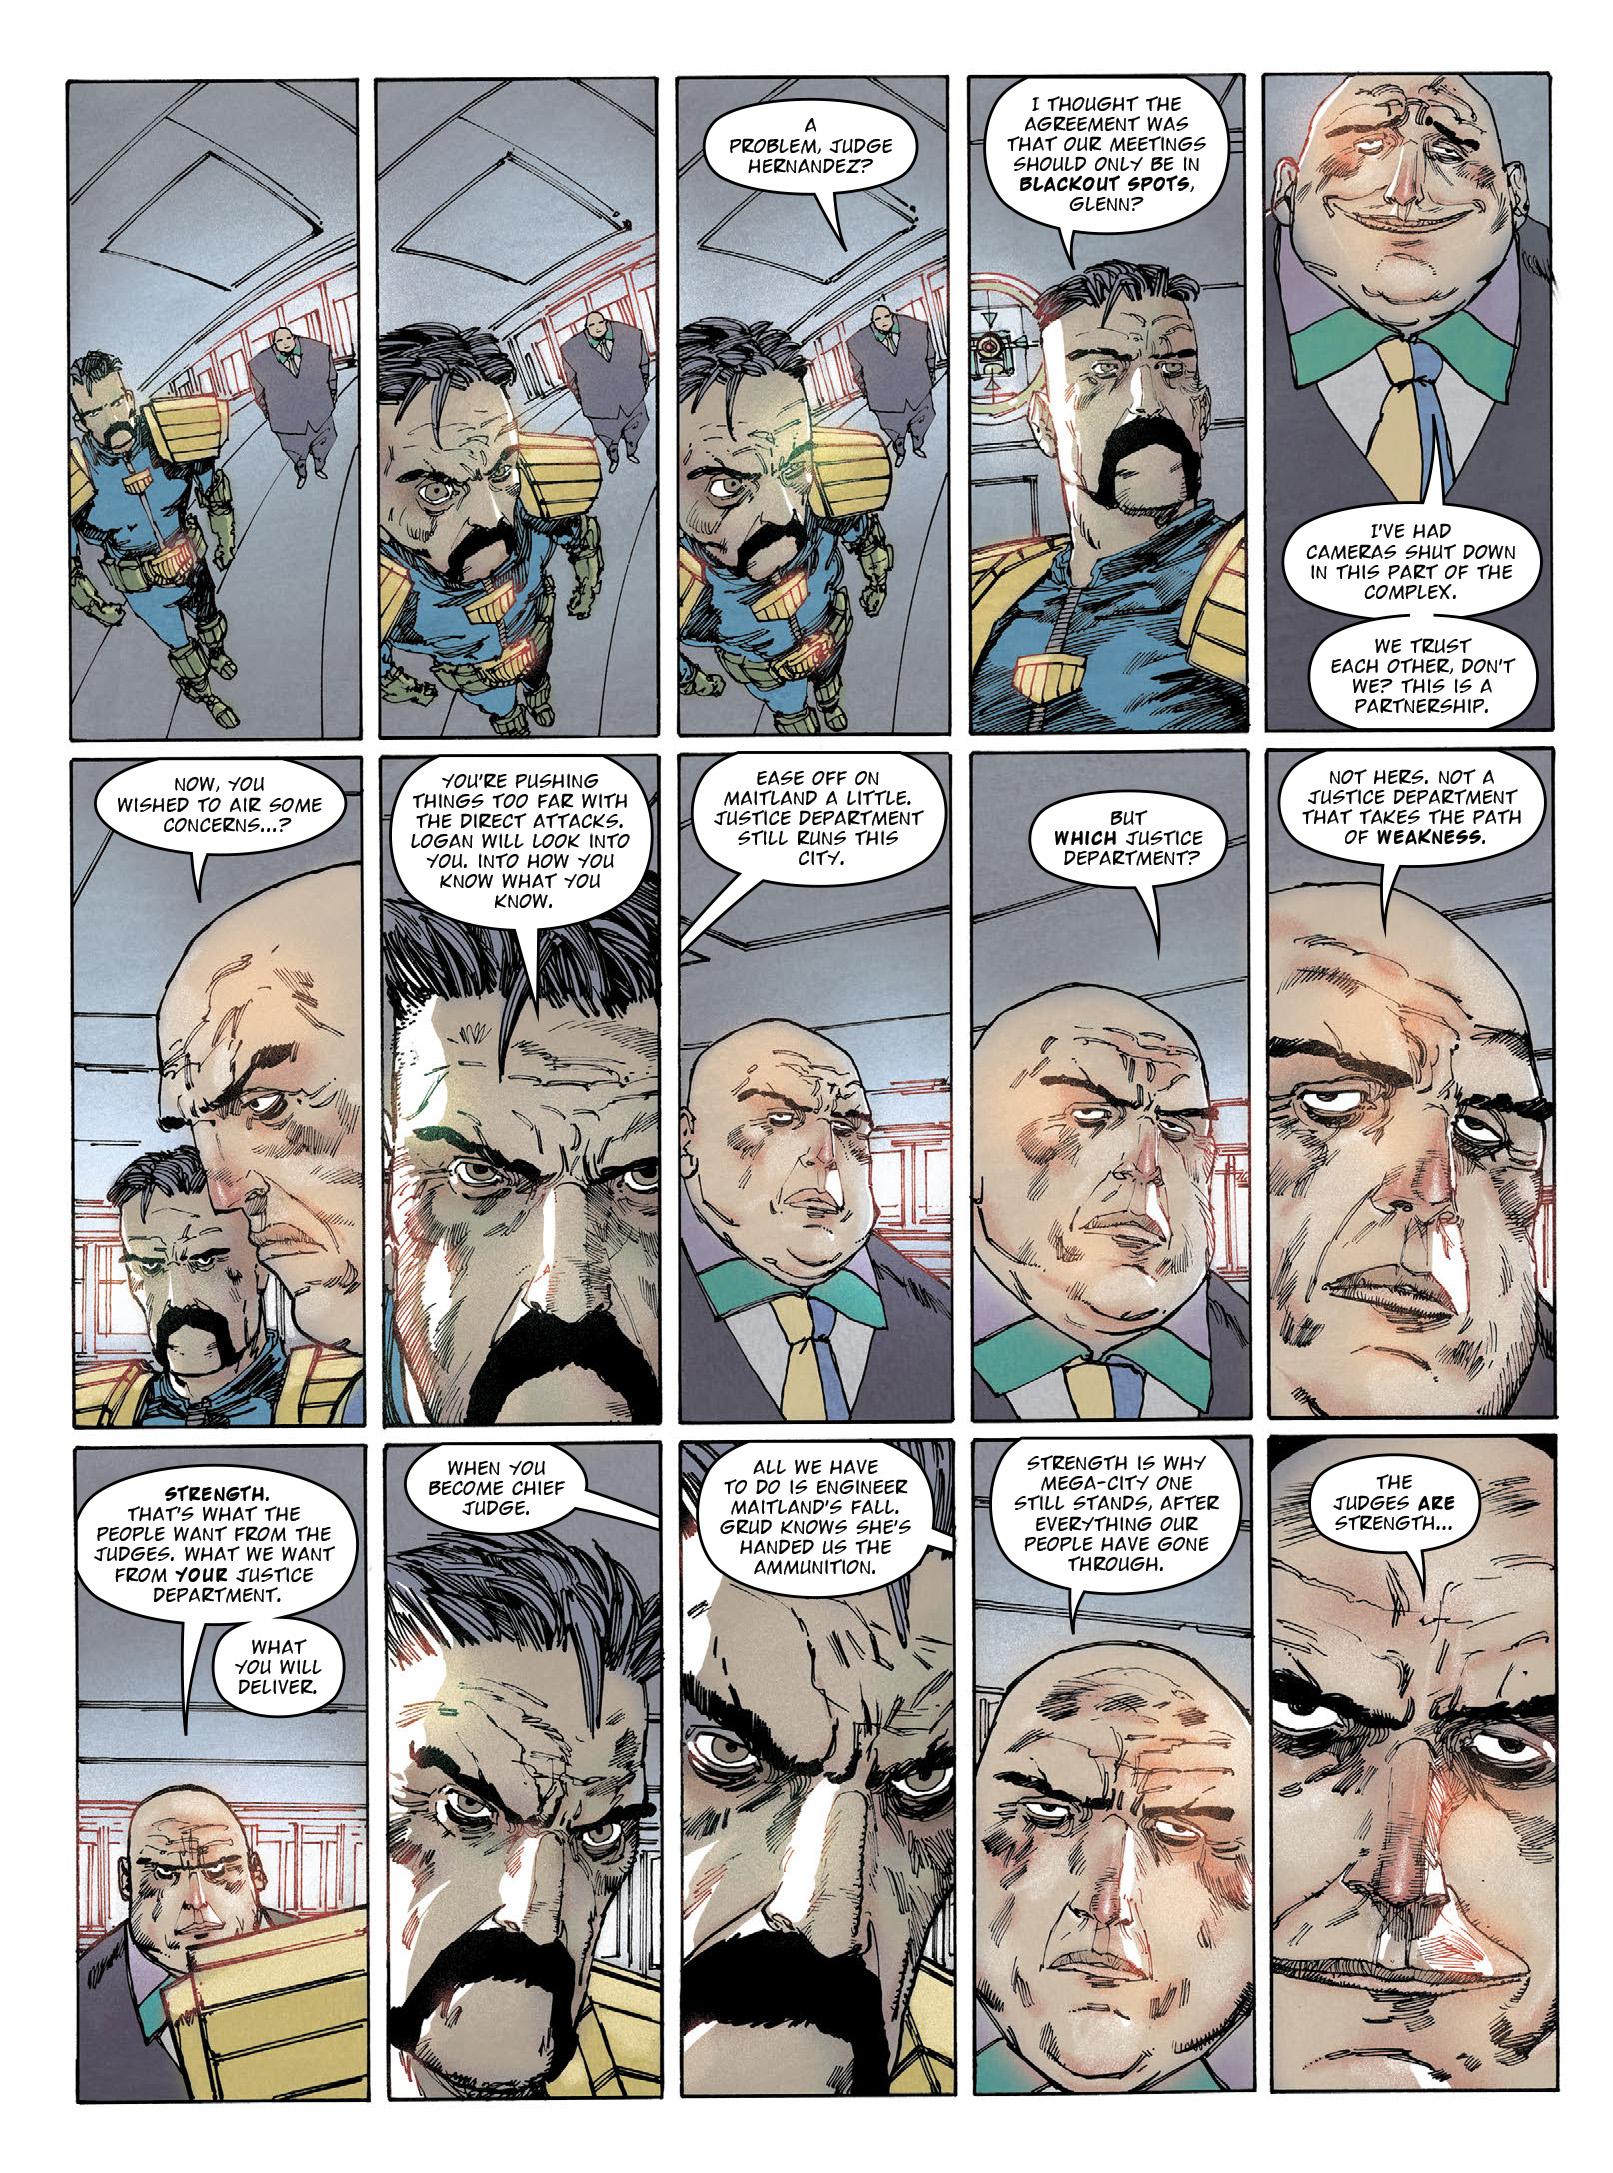 2000 AD: Chapter 2368 - Page 3